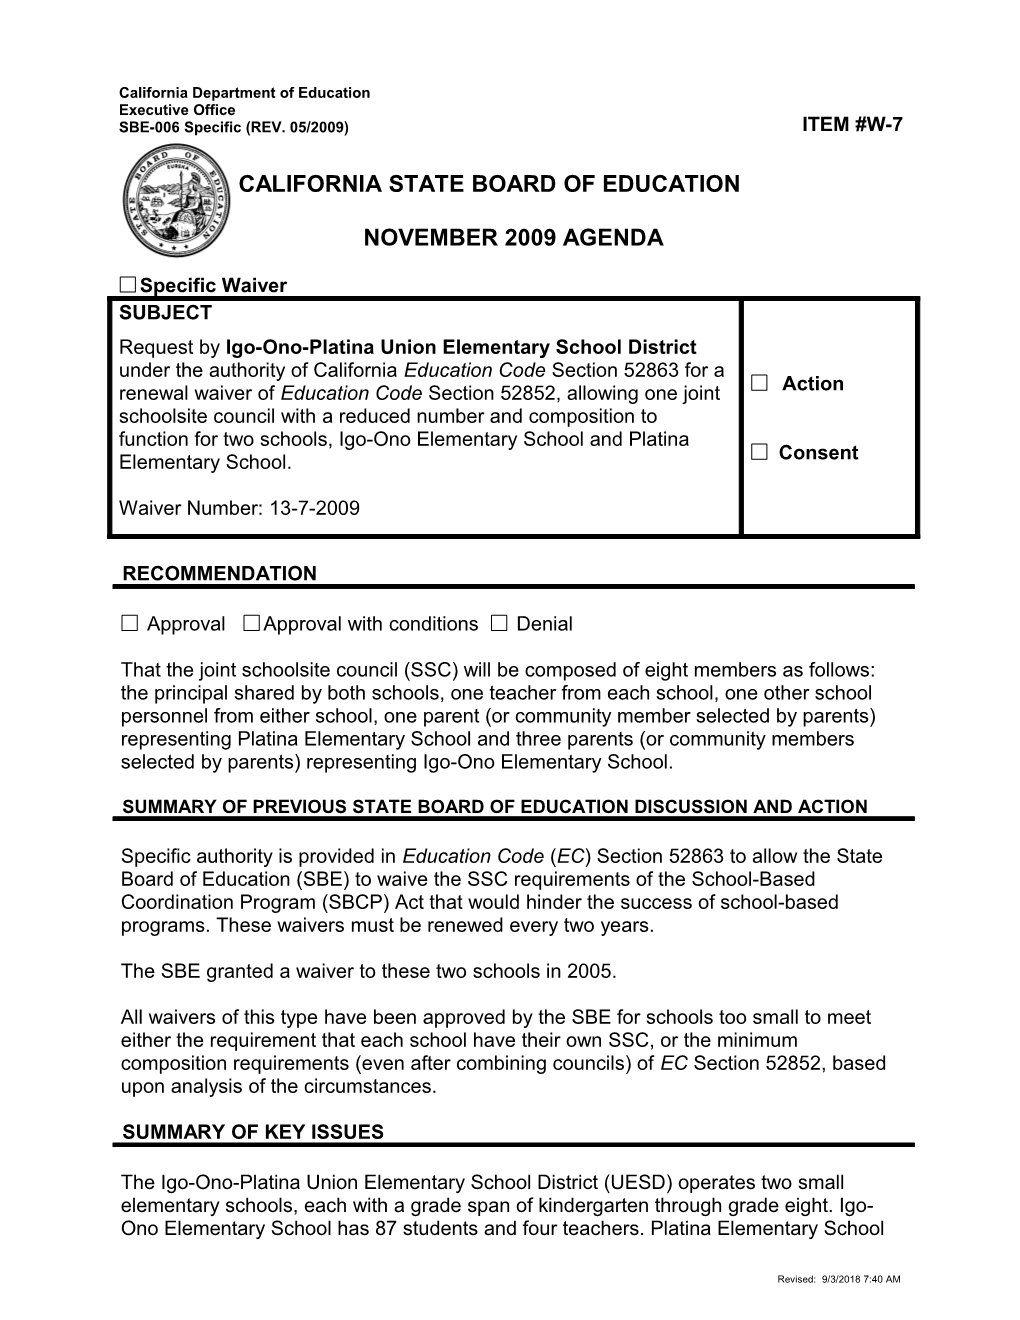 November 2009 Waiver Item W7 - Meeting Agendas (CA State Board of Education)